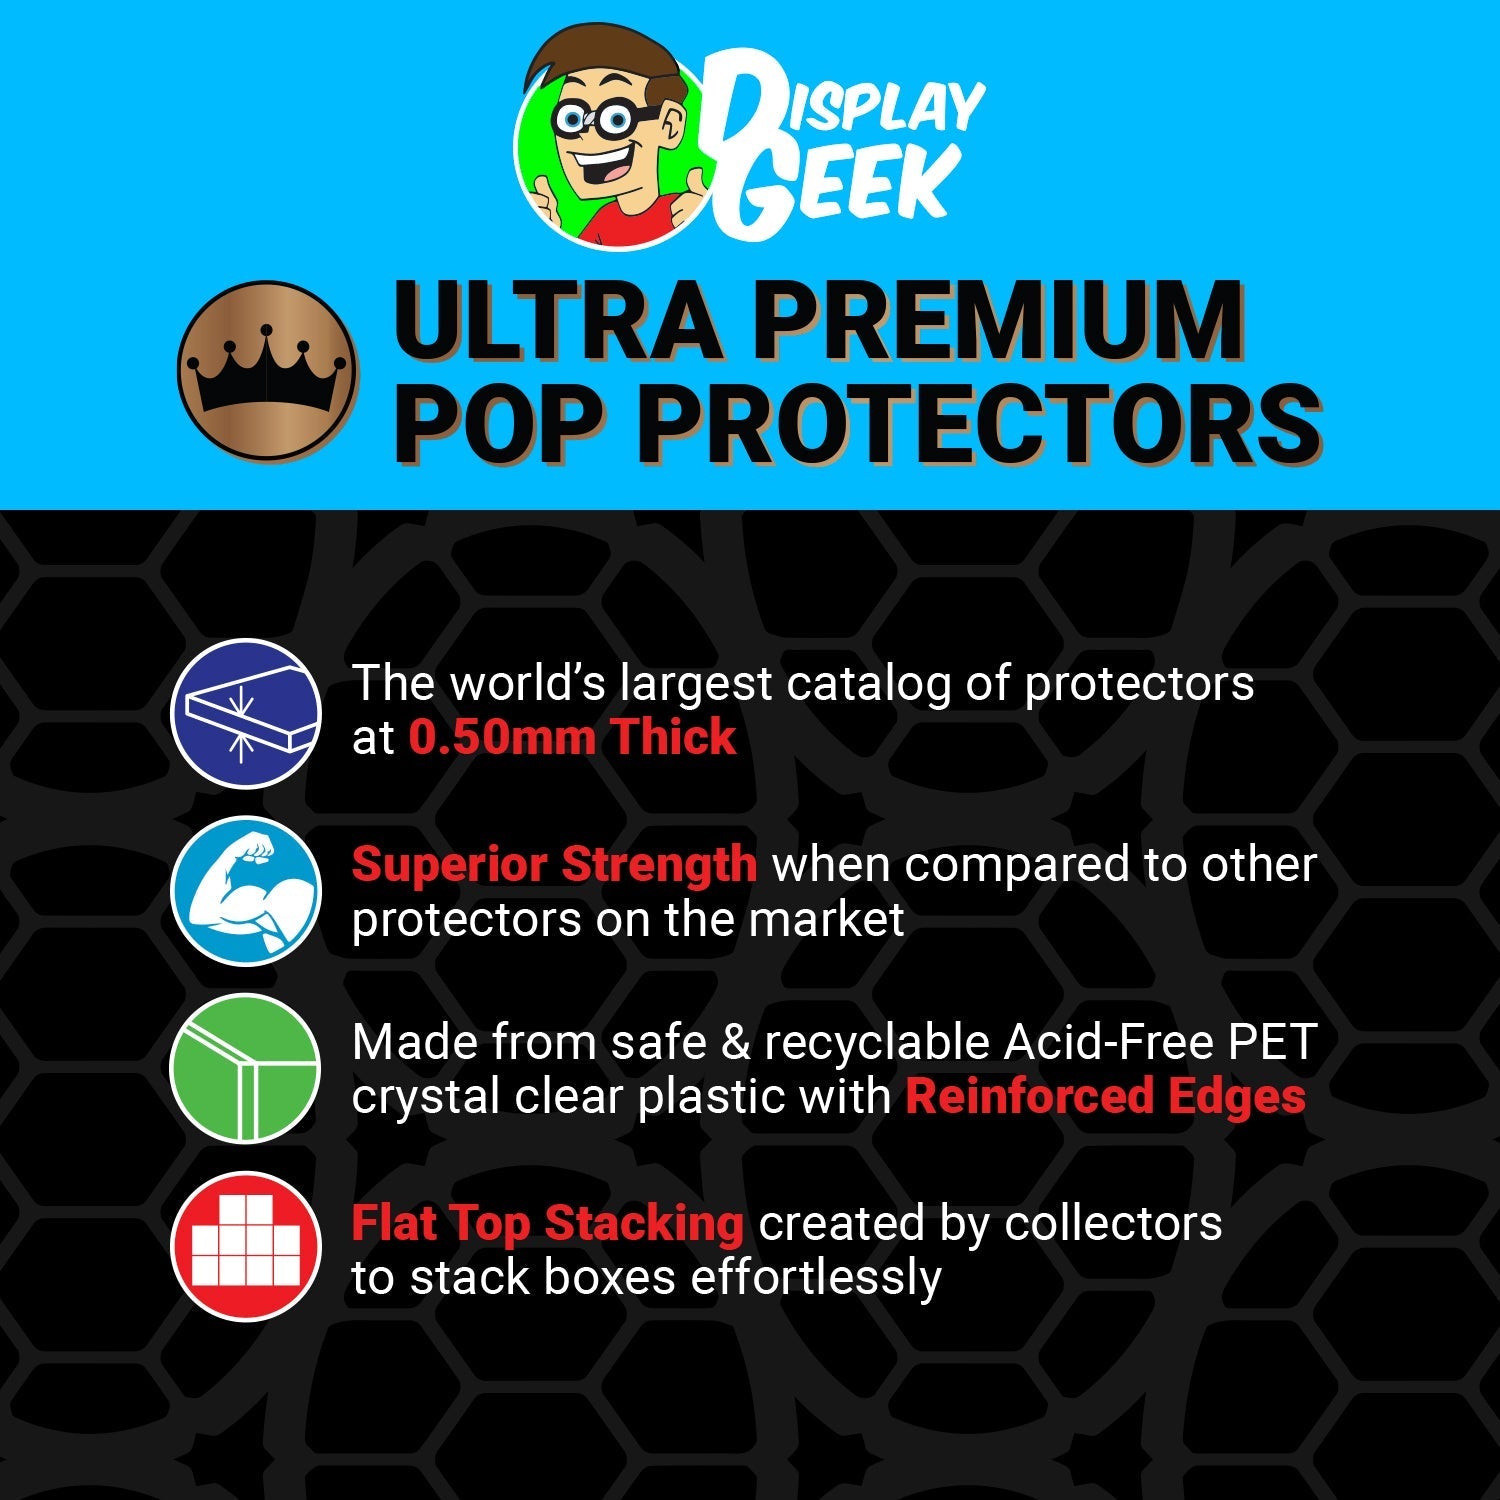 Pop Protector for Frosty Franklin with Post Office #03 Funko Pop Town - PPG Pop Protector Guide Search Created by Display Geek